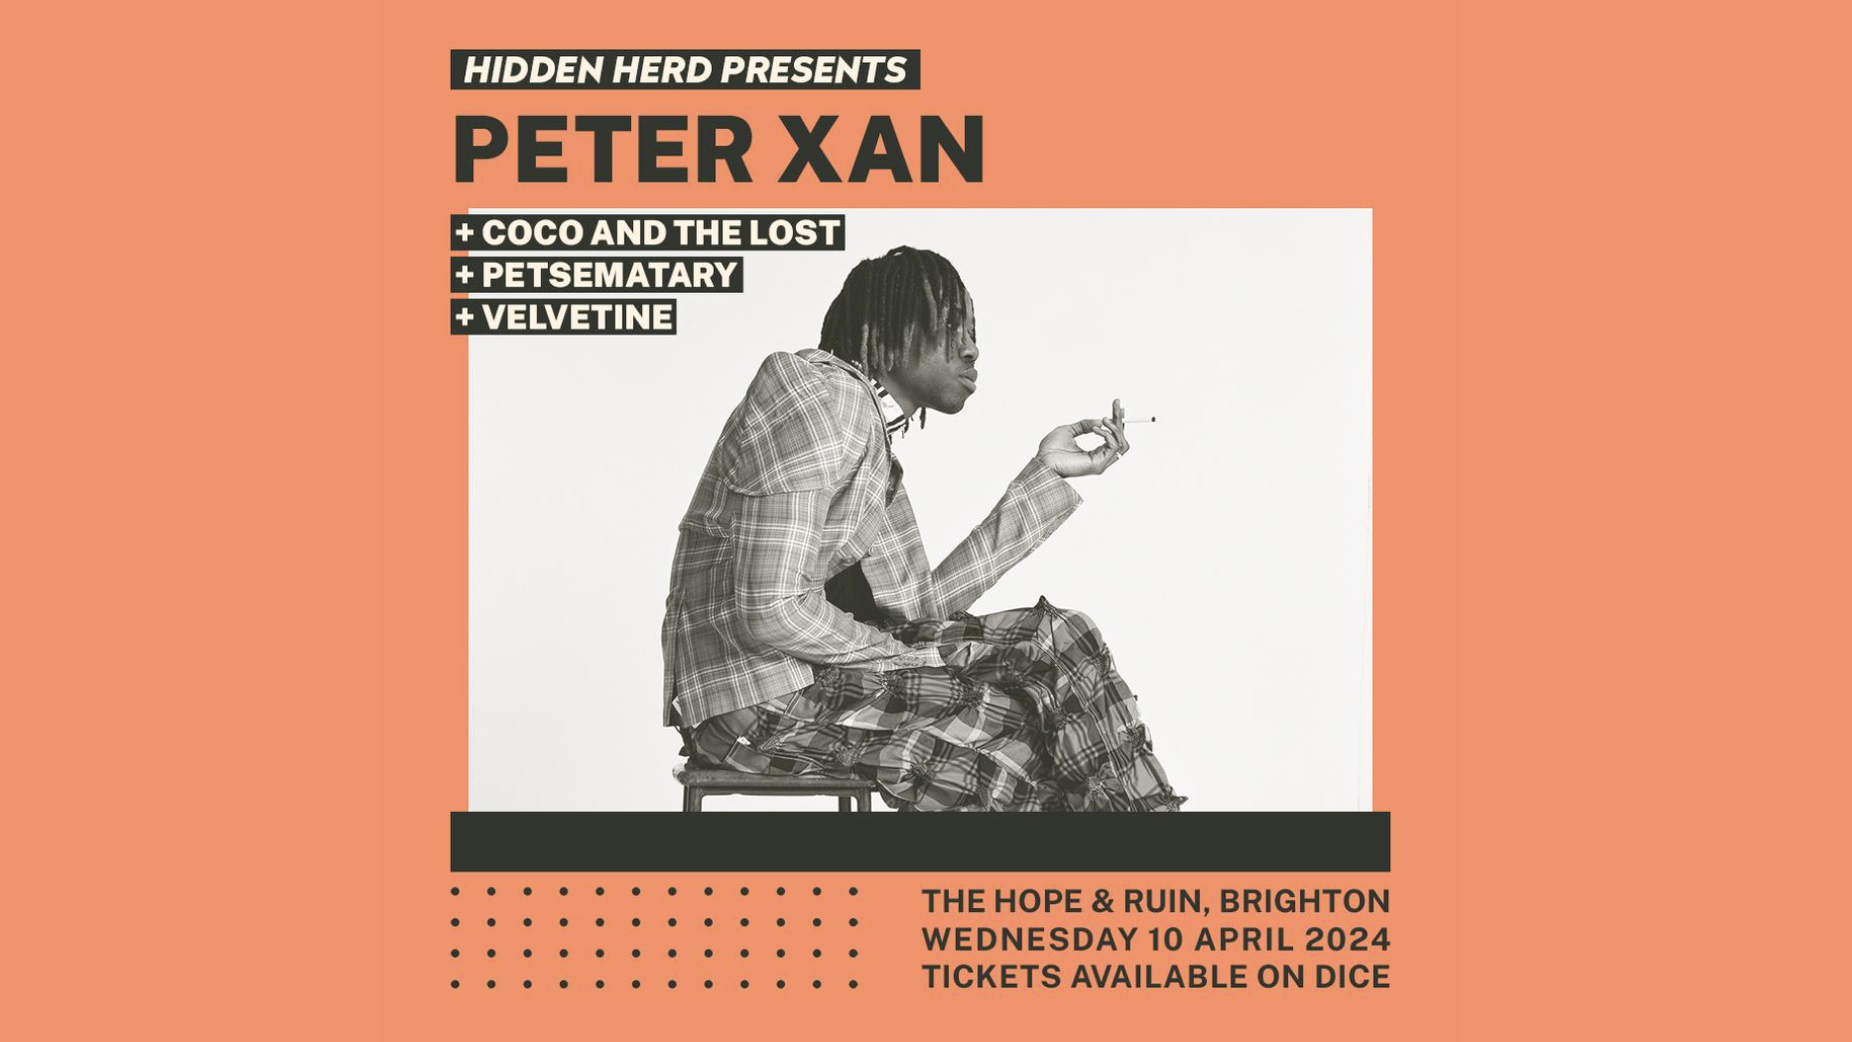 HH Presents: Peter Xan + Coco and the Lost +PETSEMATARAY + Velvetine